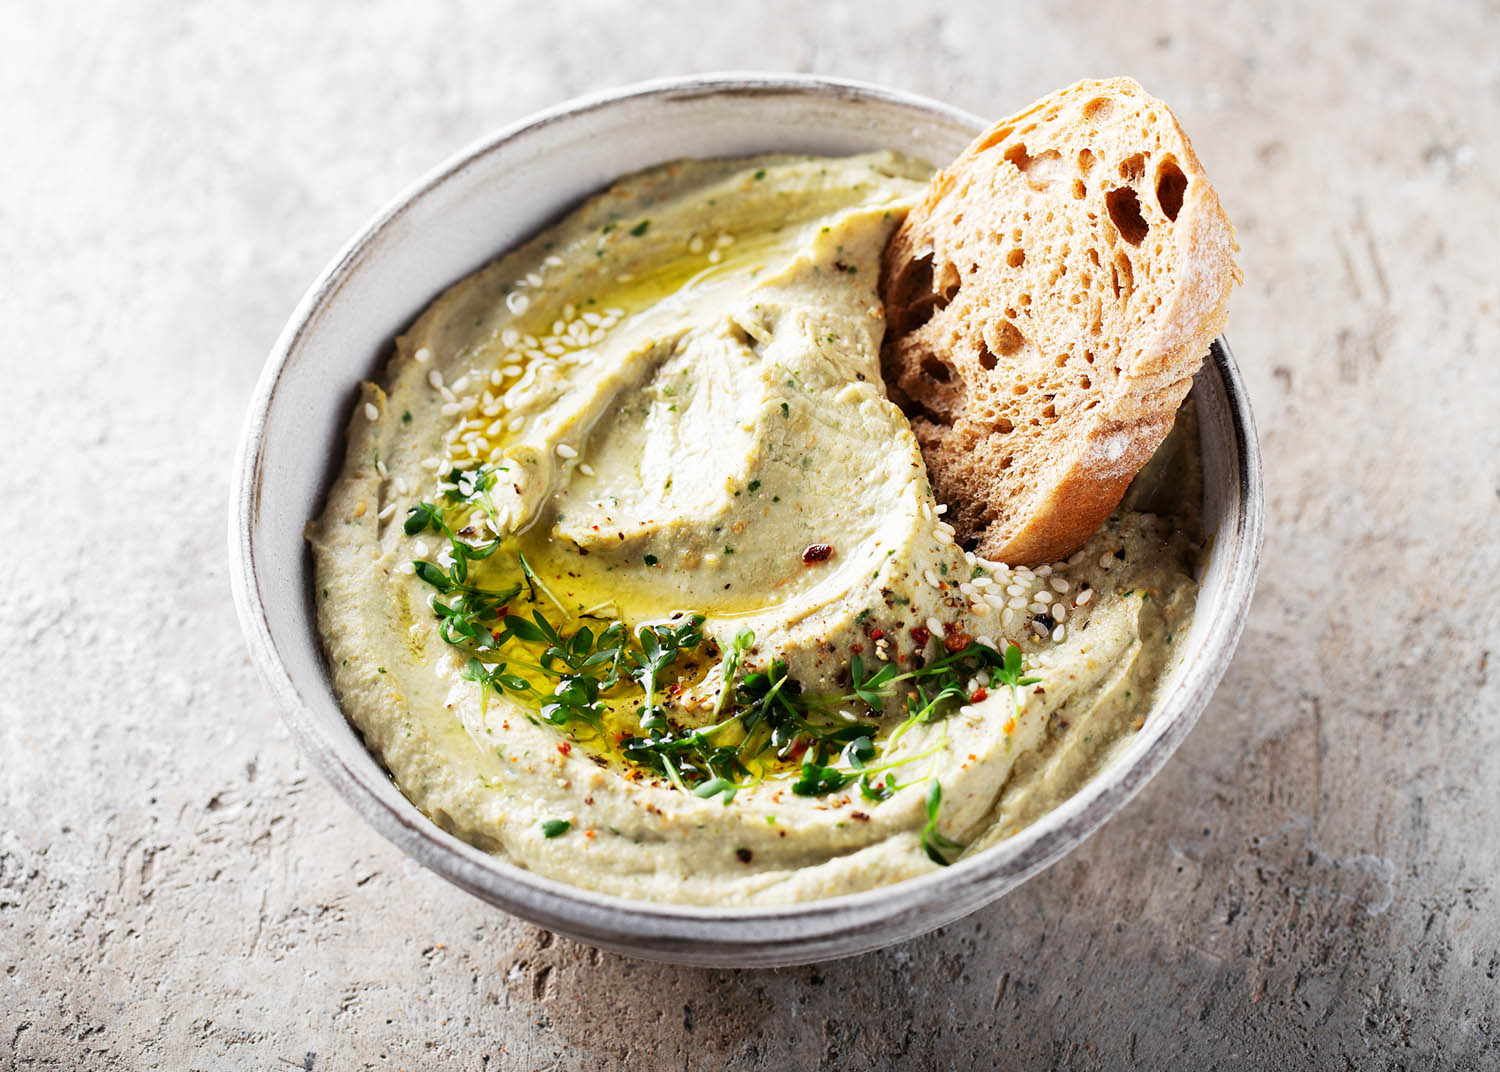 Baba ghanoush, babaganoush or eggplant hummus on the bowl with bread, traditional Middle Eastern cuisine